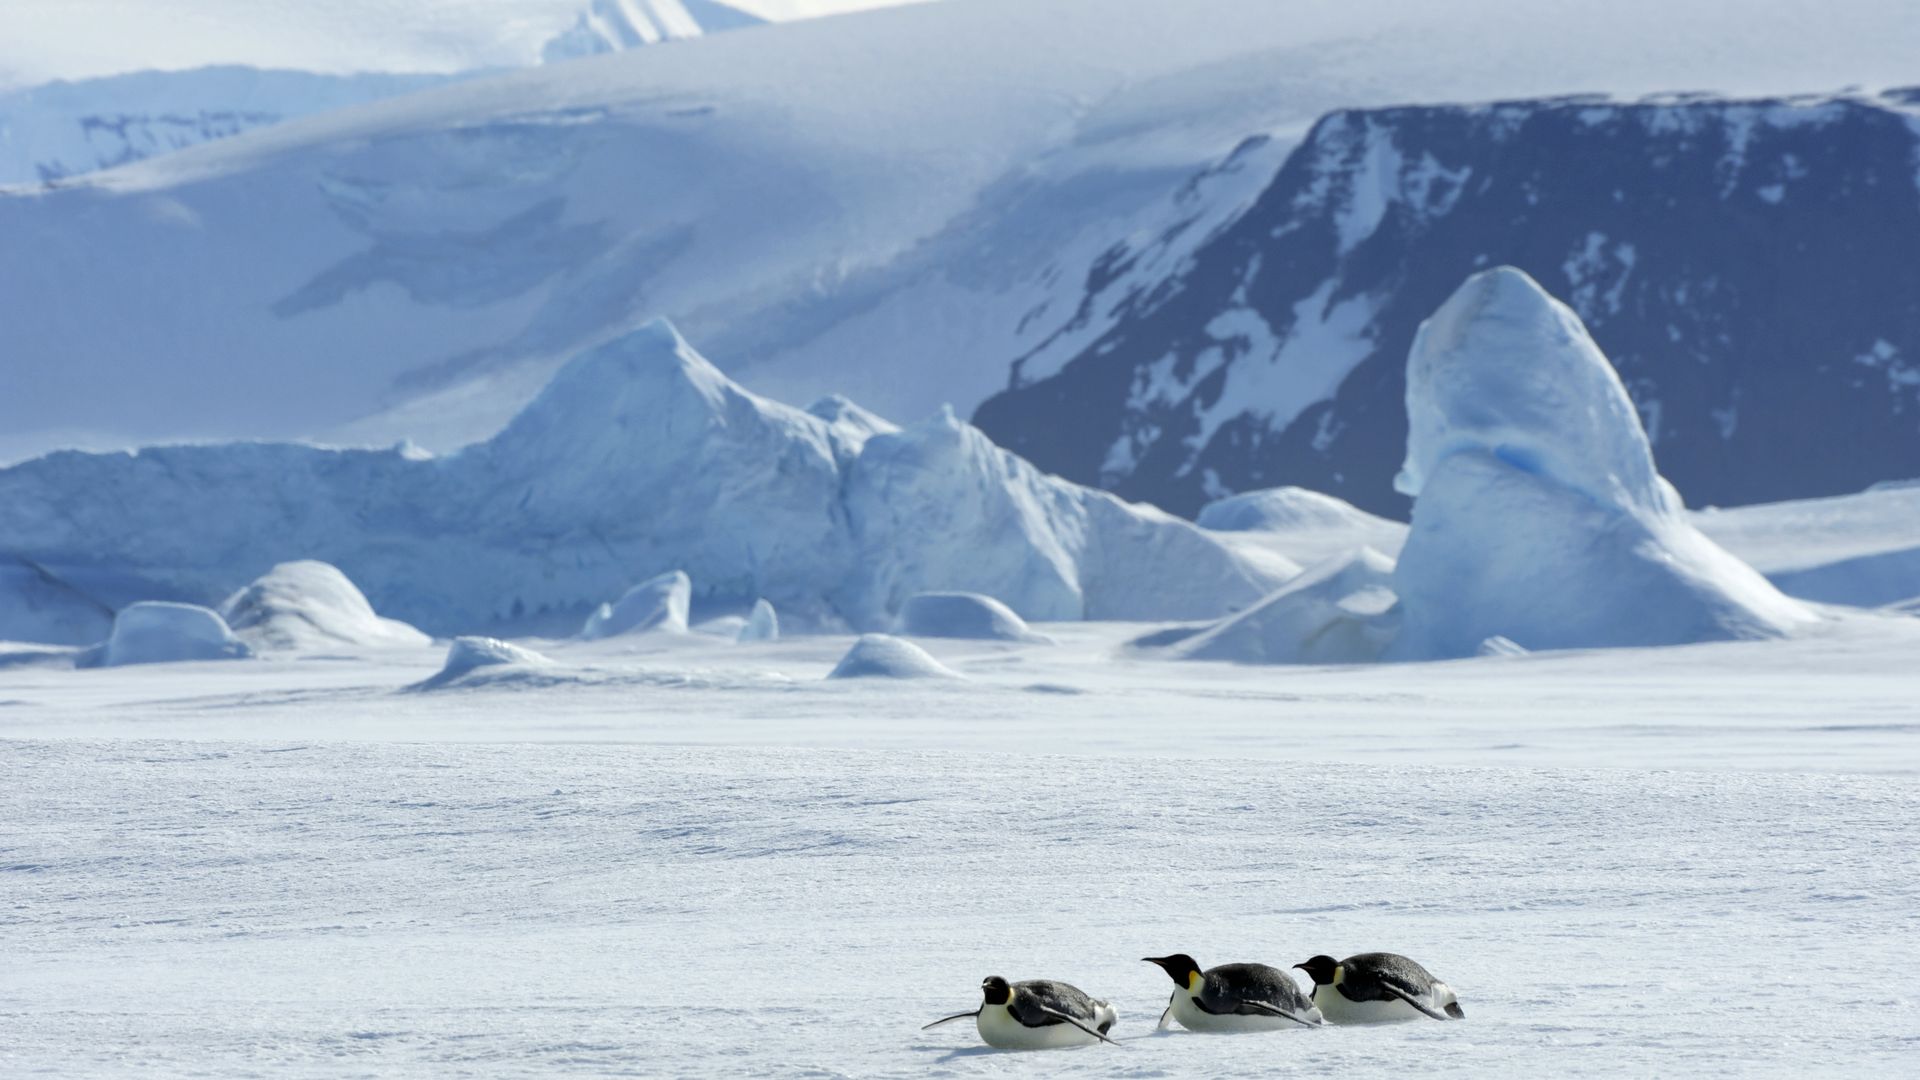 The scene in Antarctica, near Weddell Sea, at Snow Hill Island, featuring Emperor Penguins tobogganing over ice. 